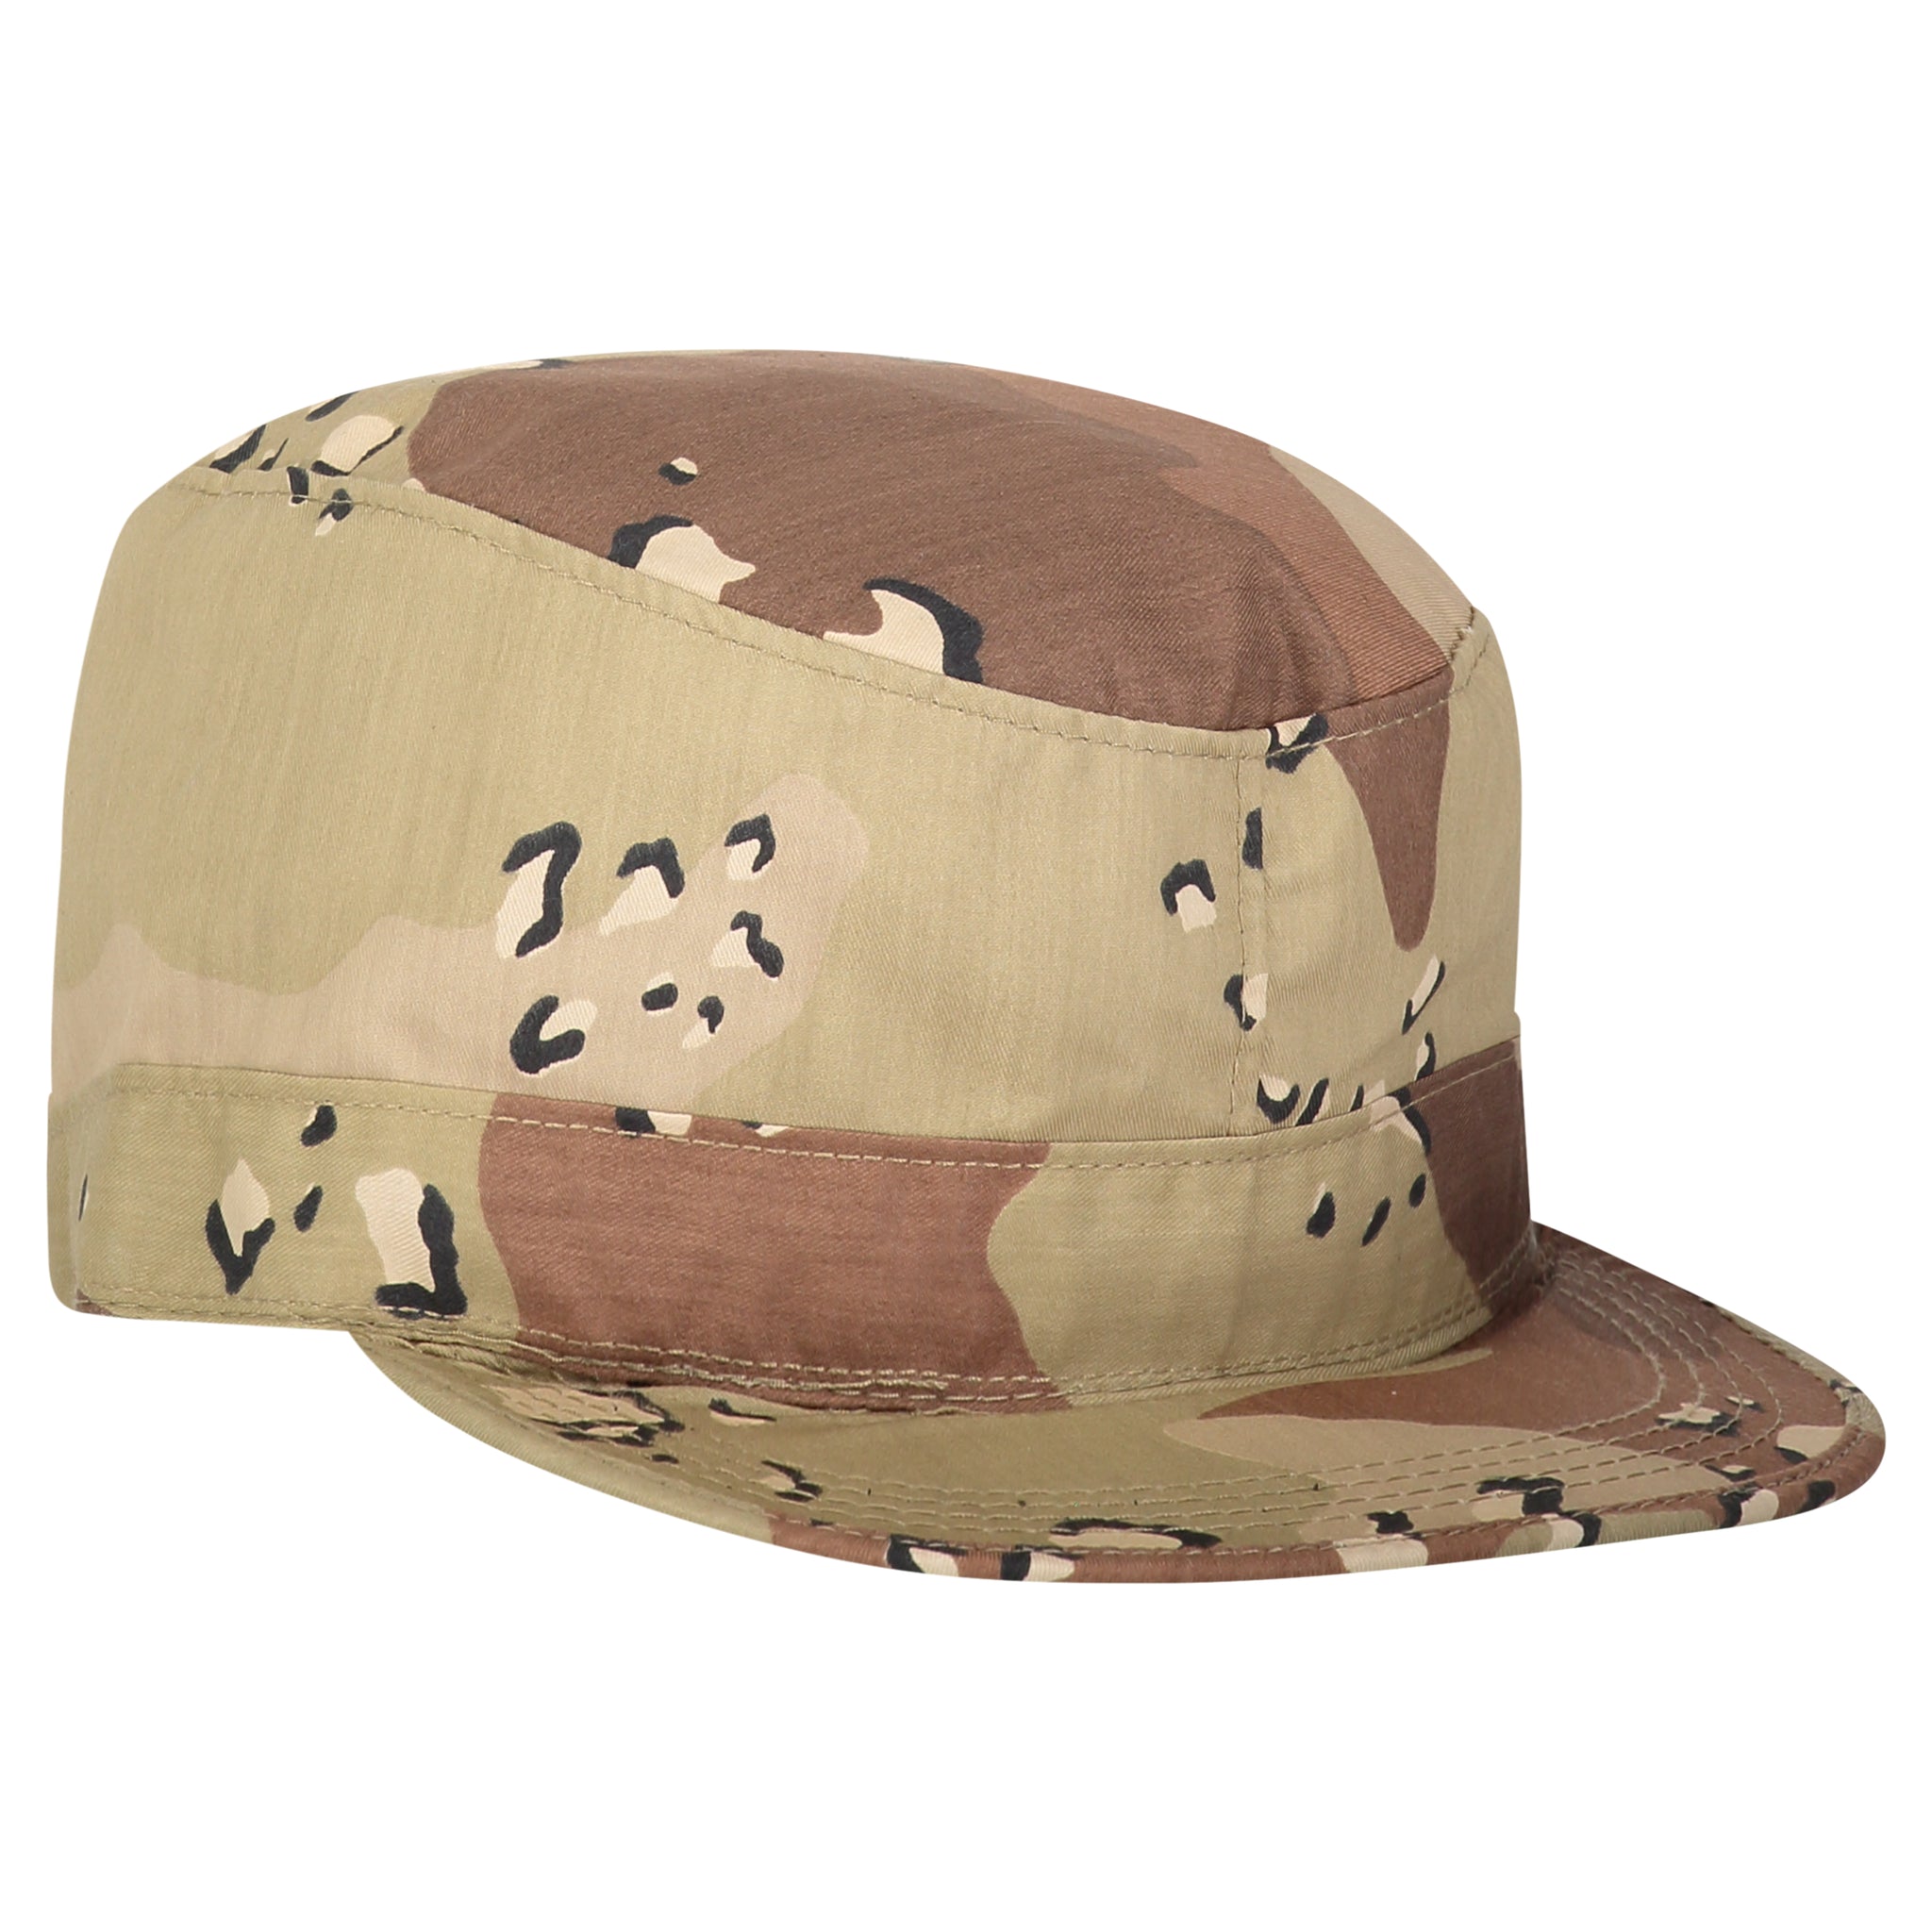 McGuire Army Cap Combat Navy Military Style –